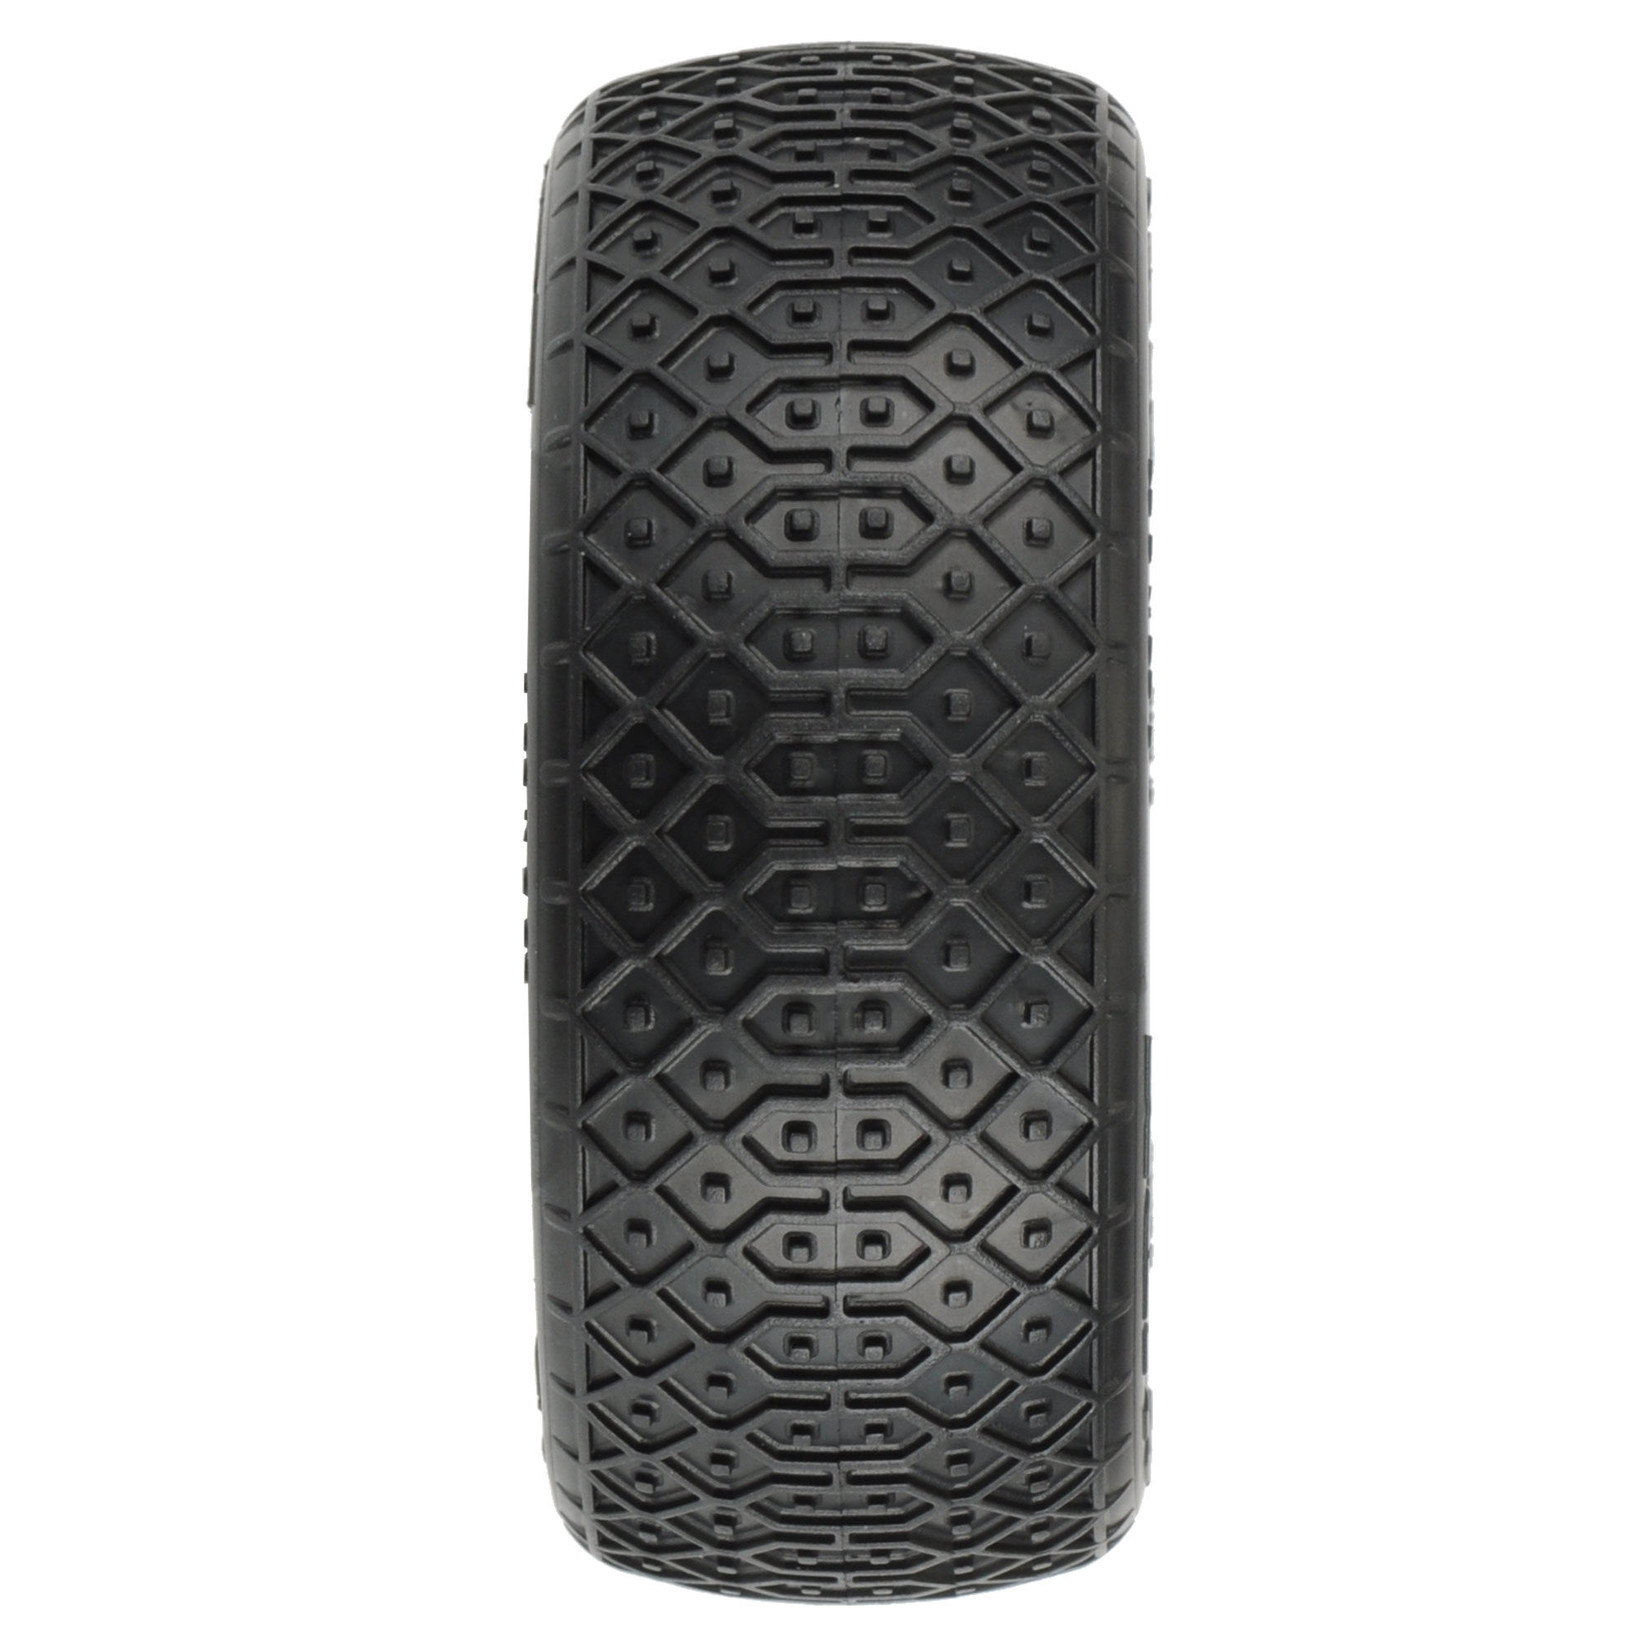 Pro-Line 1/10 Electron MC 4WD Front 2.2" Off-Road Buggy Tires (2)